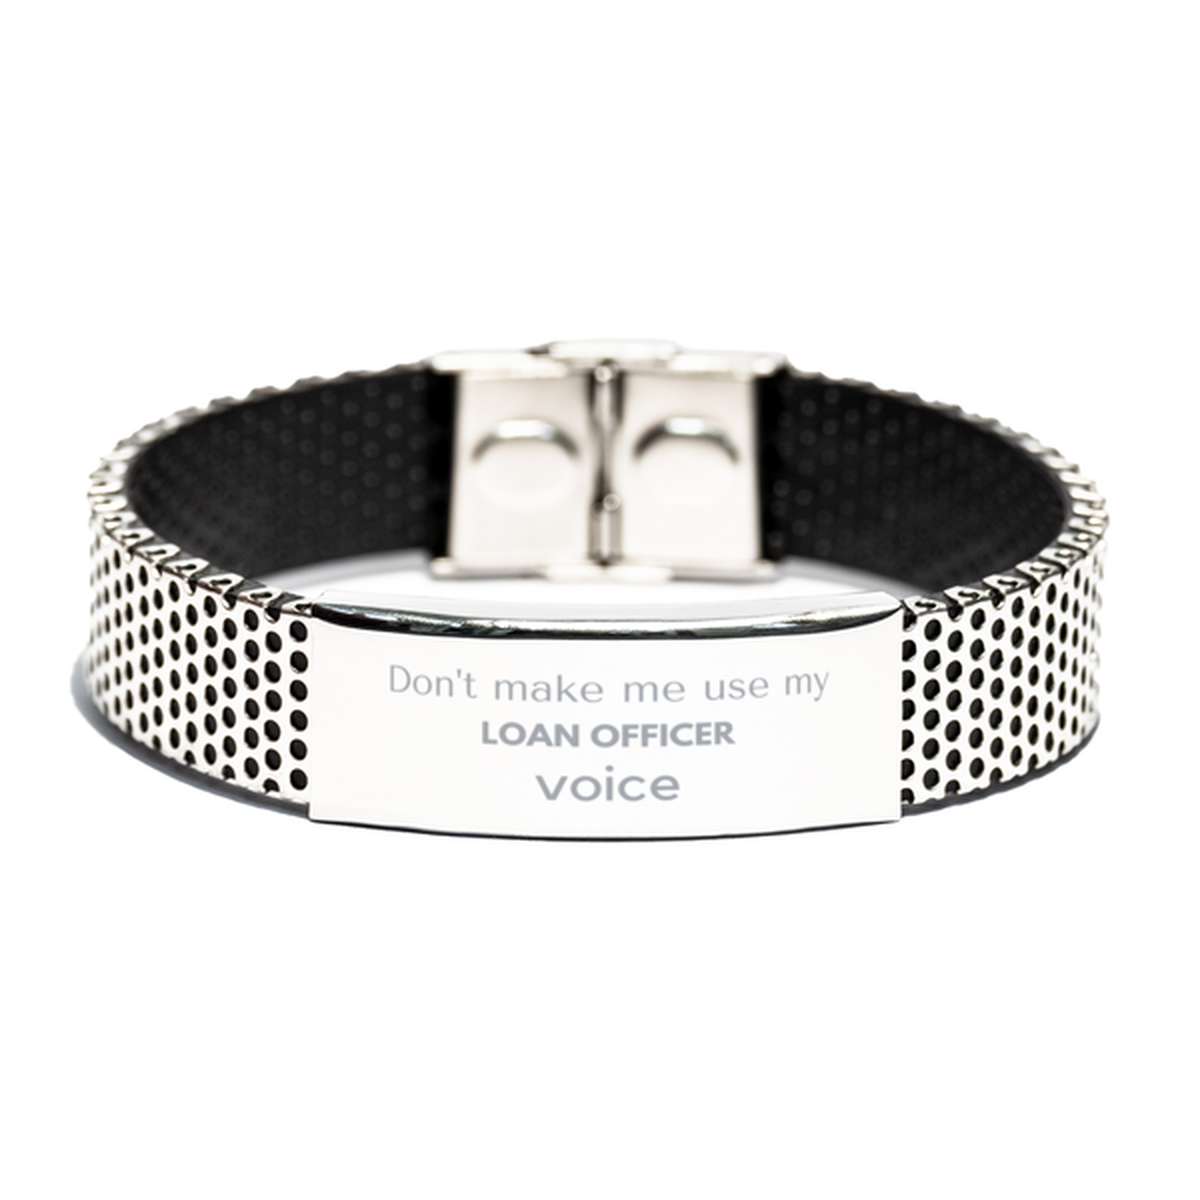 Don't make me use my Loan Officer voice, Sarcasm Loan Officer Gifts, Christmas Loan Officer Stainless Steel Bracelet Birthday Unique Gifts For Loan Officer Coworkers, Men, Women, Colleague, Friends